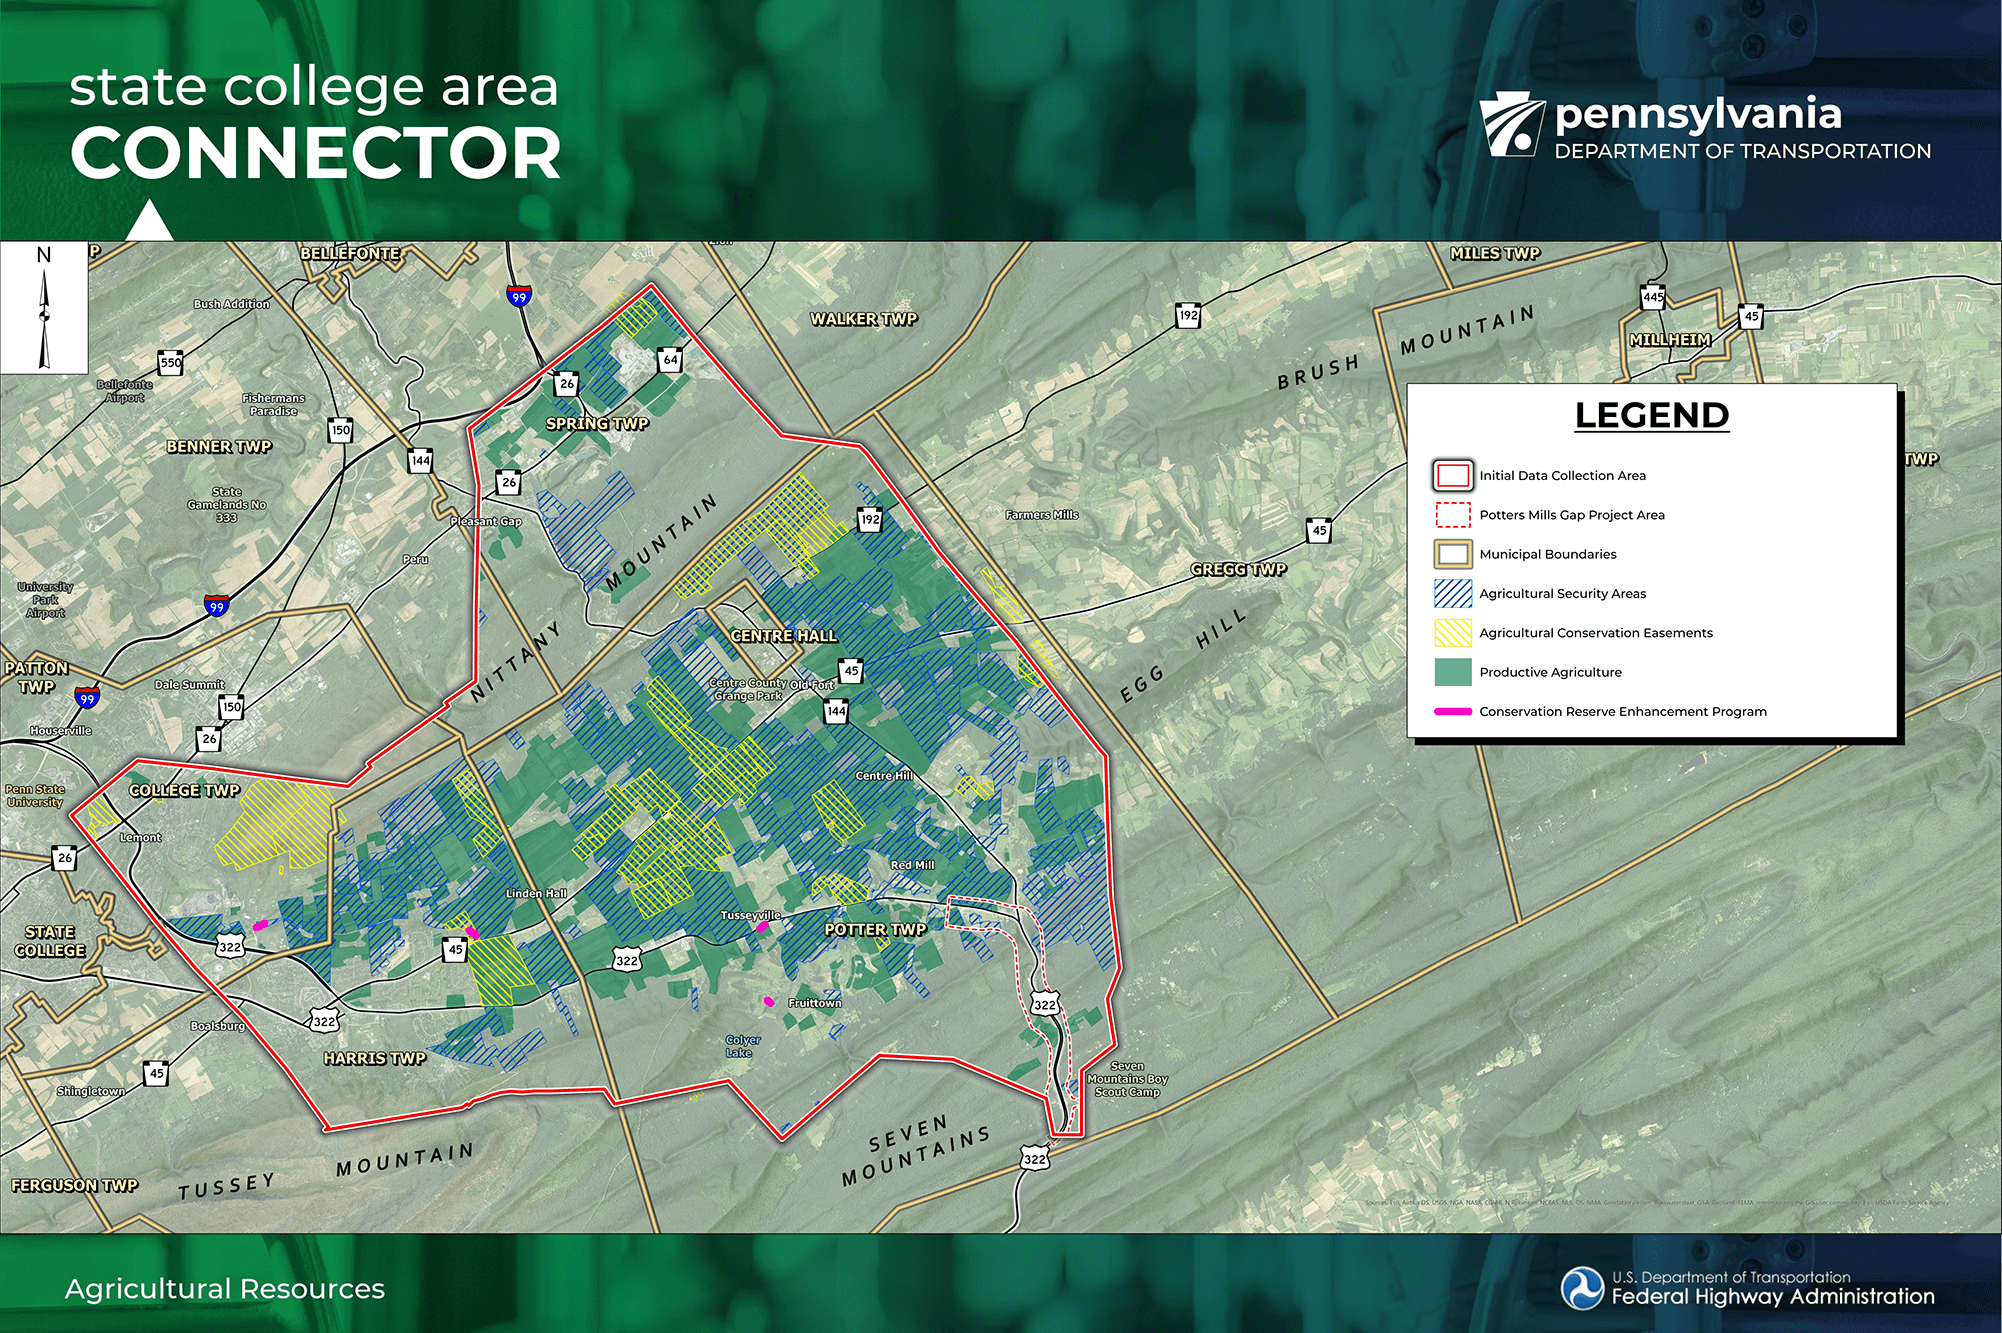 agricultural resources board for State College Area Connector meeting